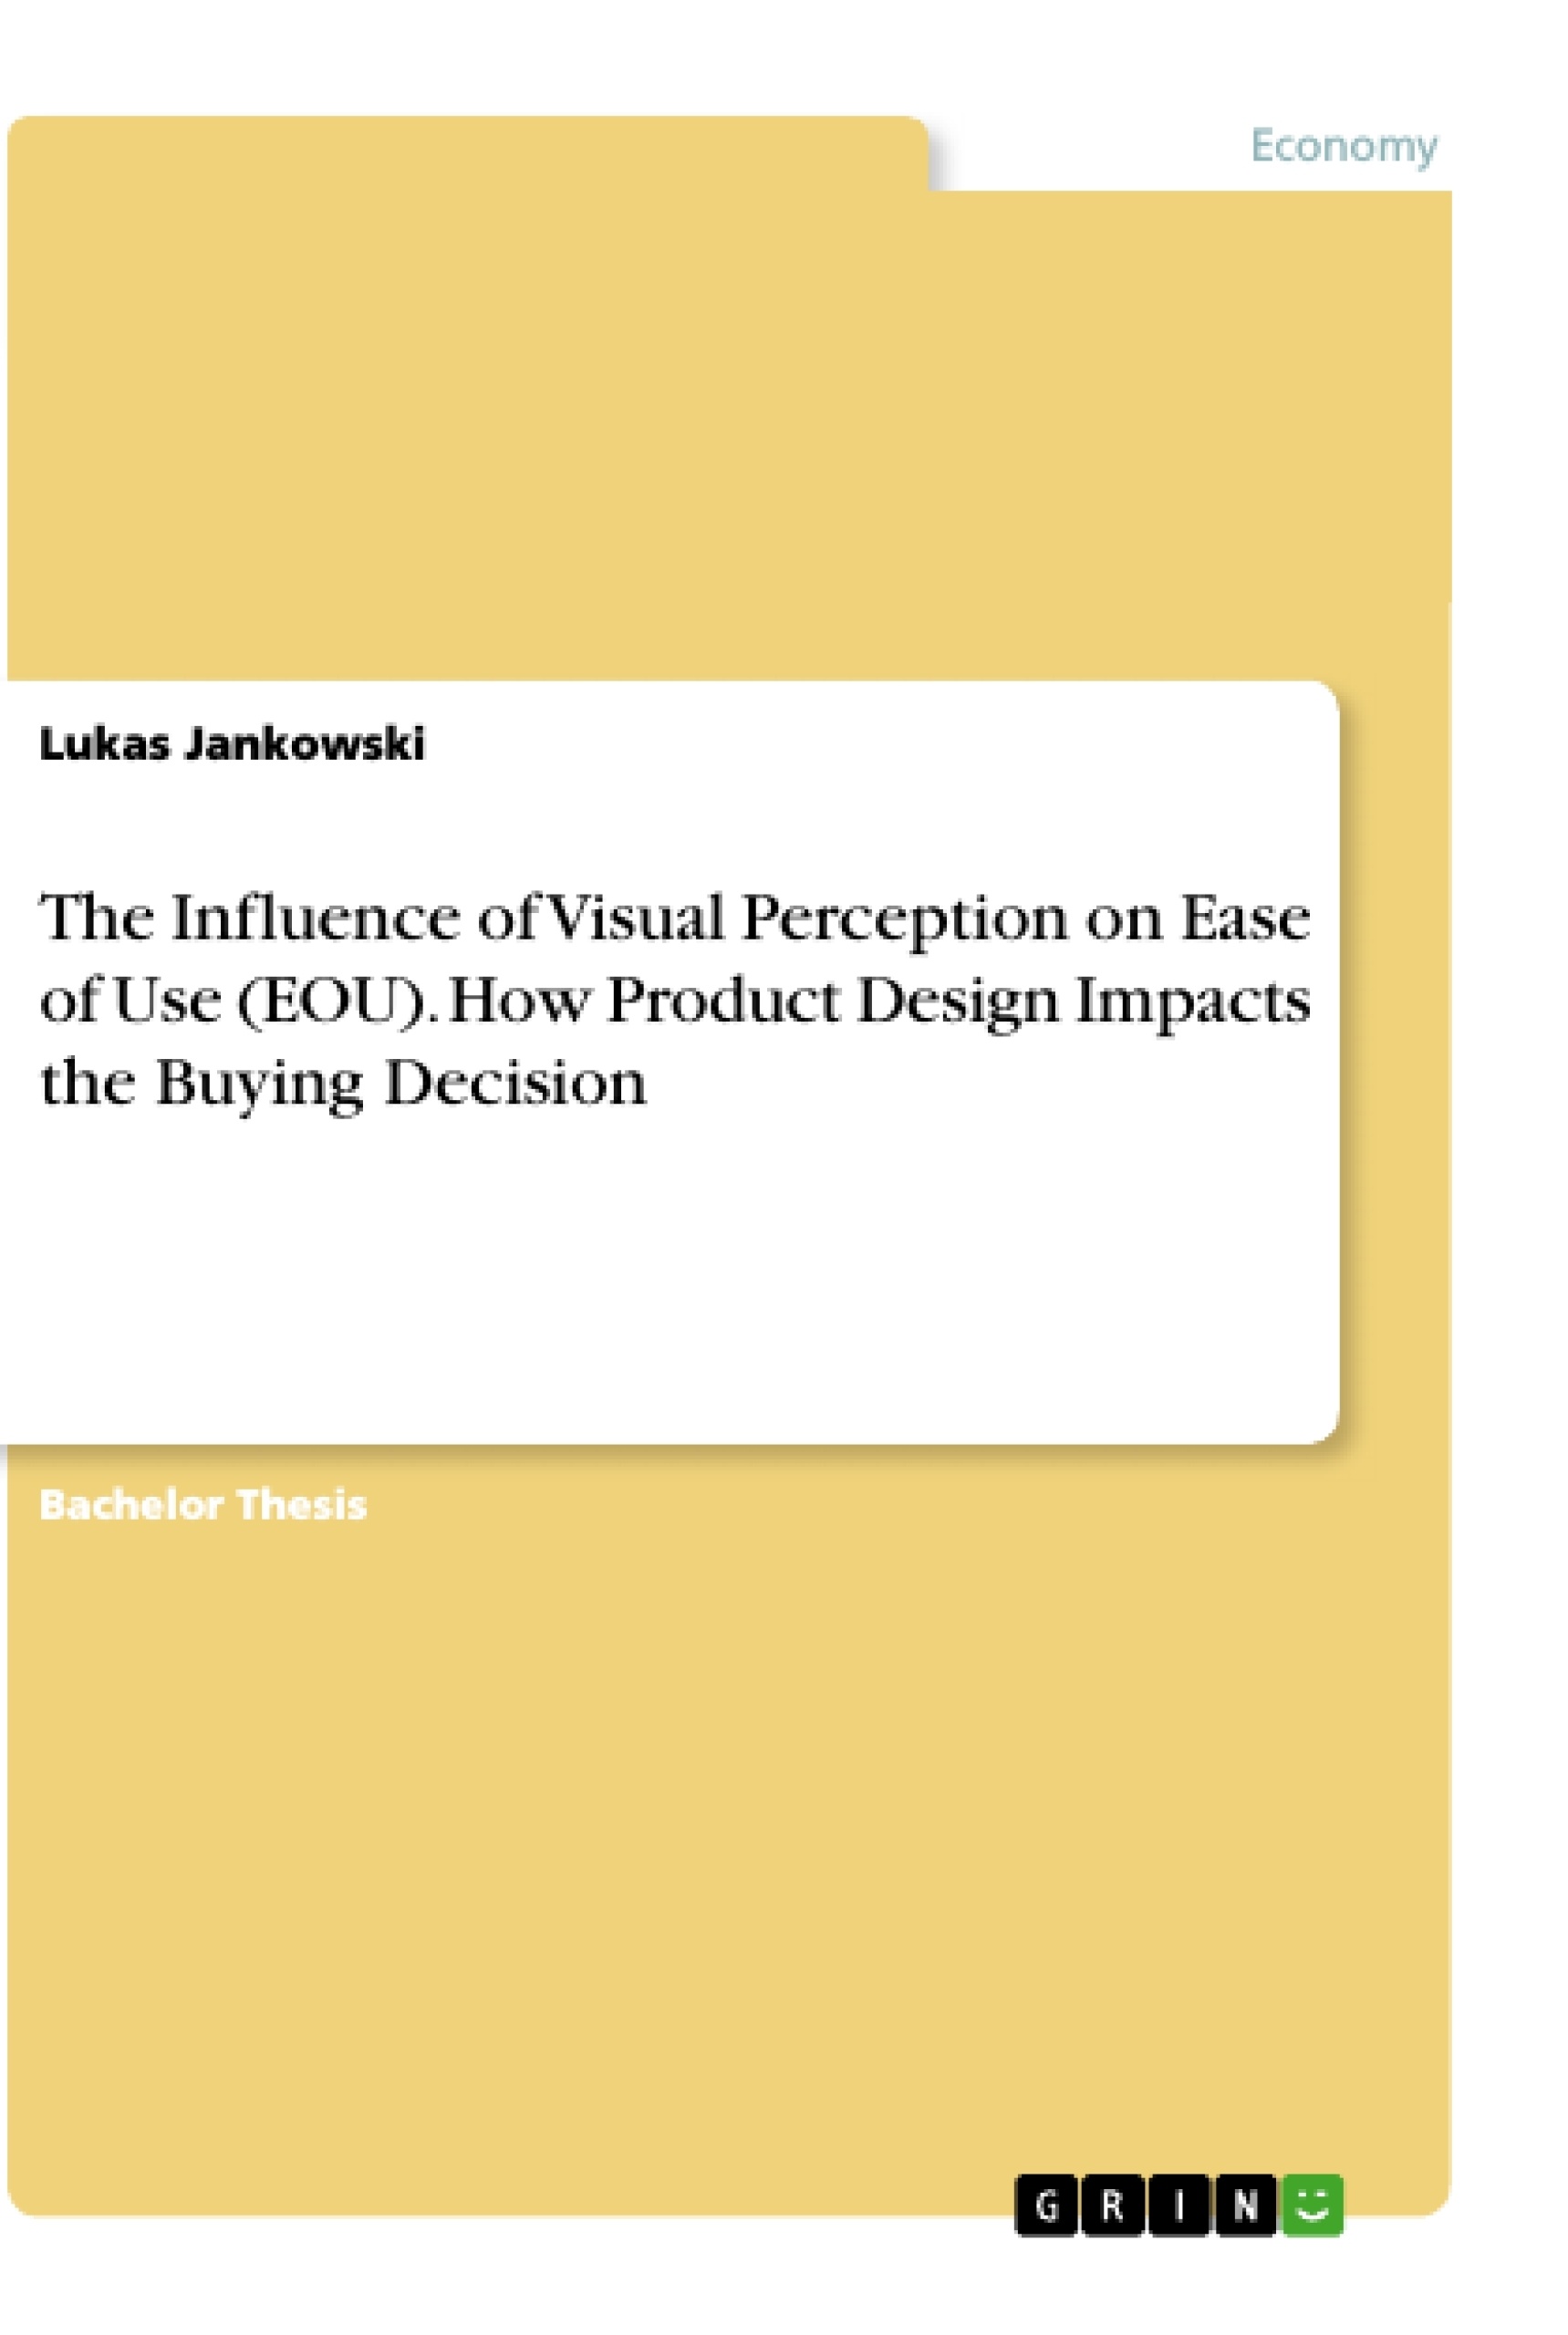 Título: The Influence of Visual Perception on Ease of Use (EOU). How Product Design Impacts the Buying Decision